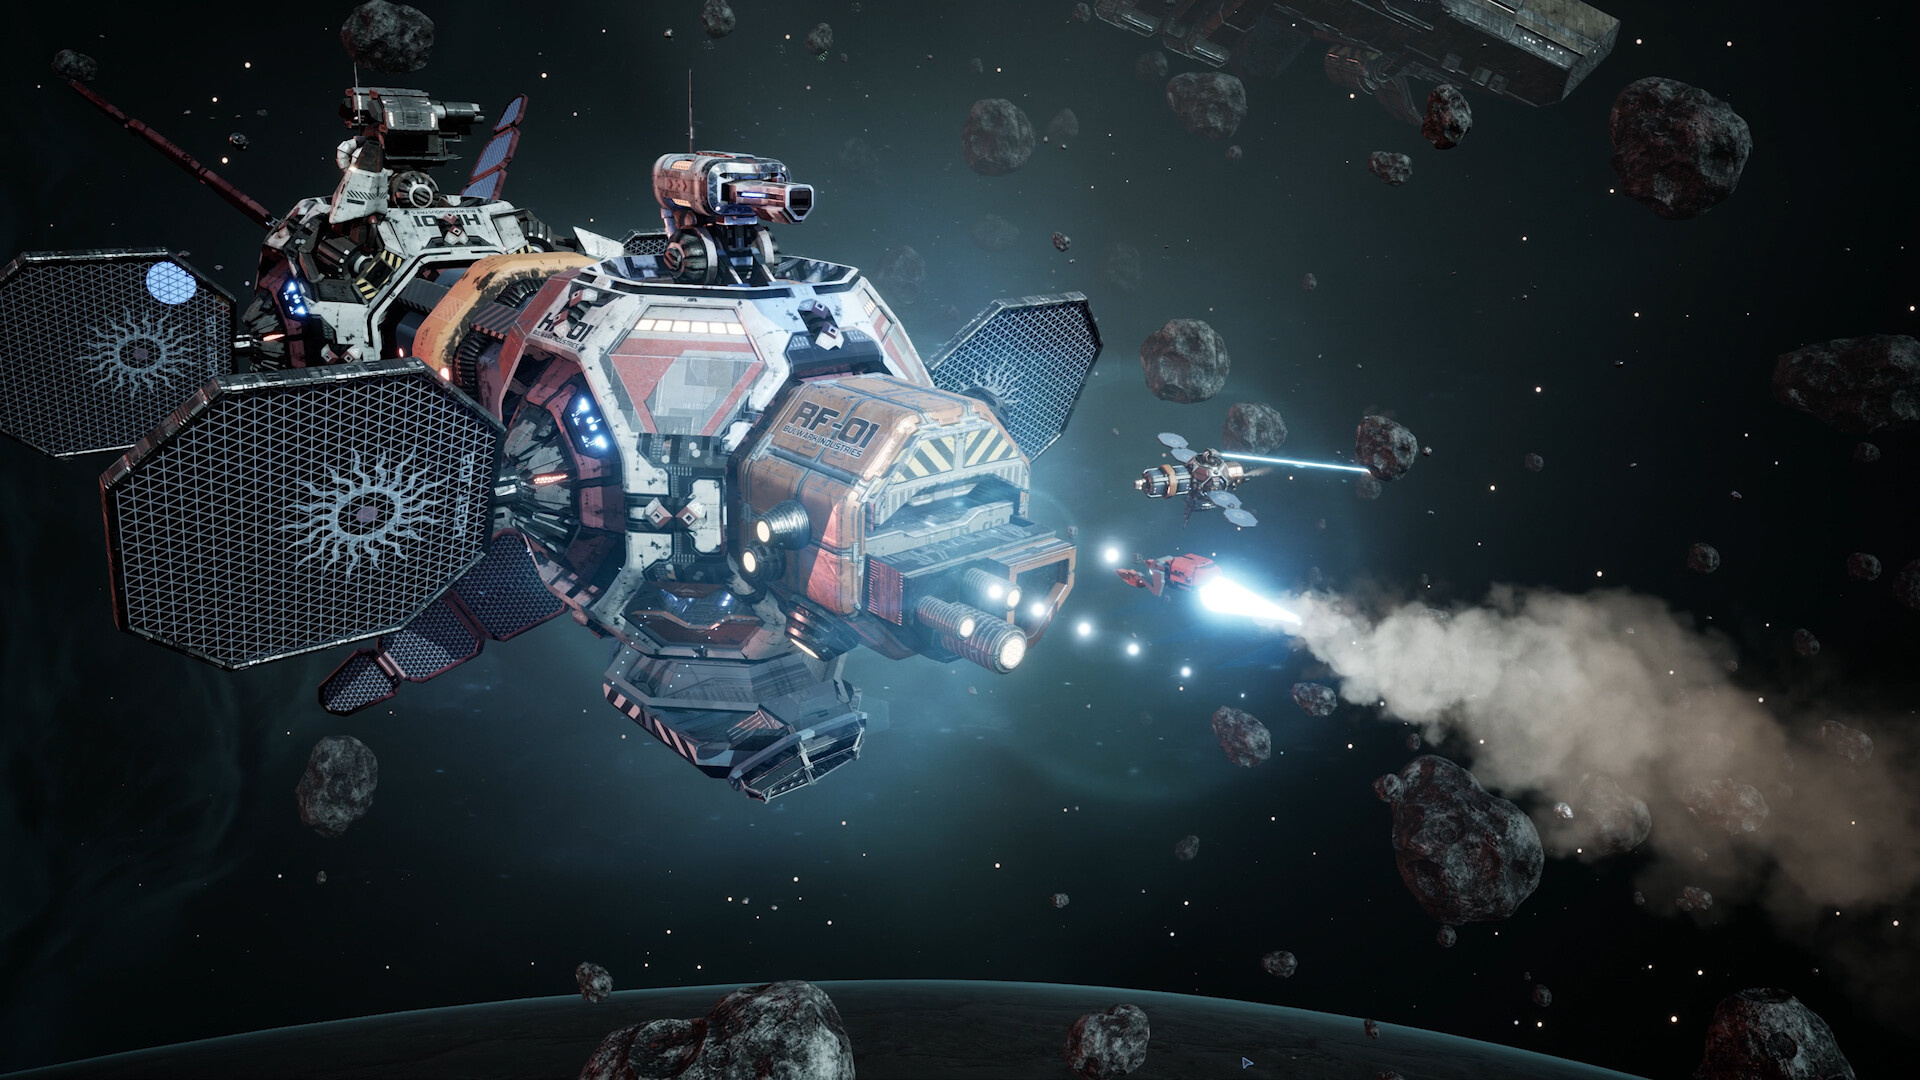  This upcoming indie game about mining asteroids and fighting aliens might be the new Homeworld-style experience I've been waiting for 